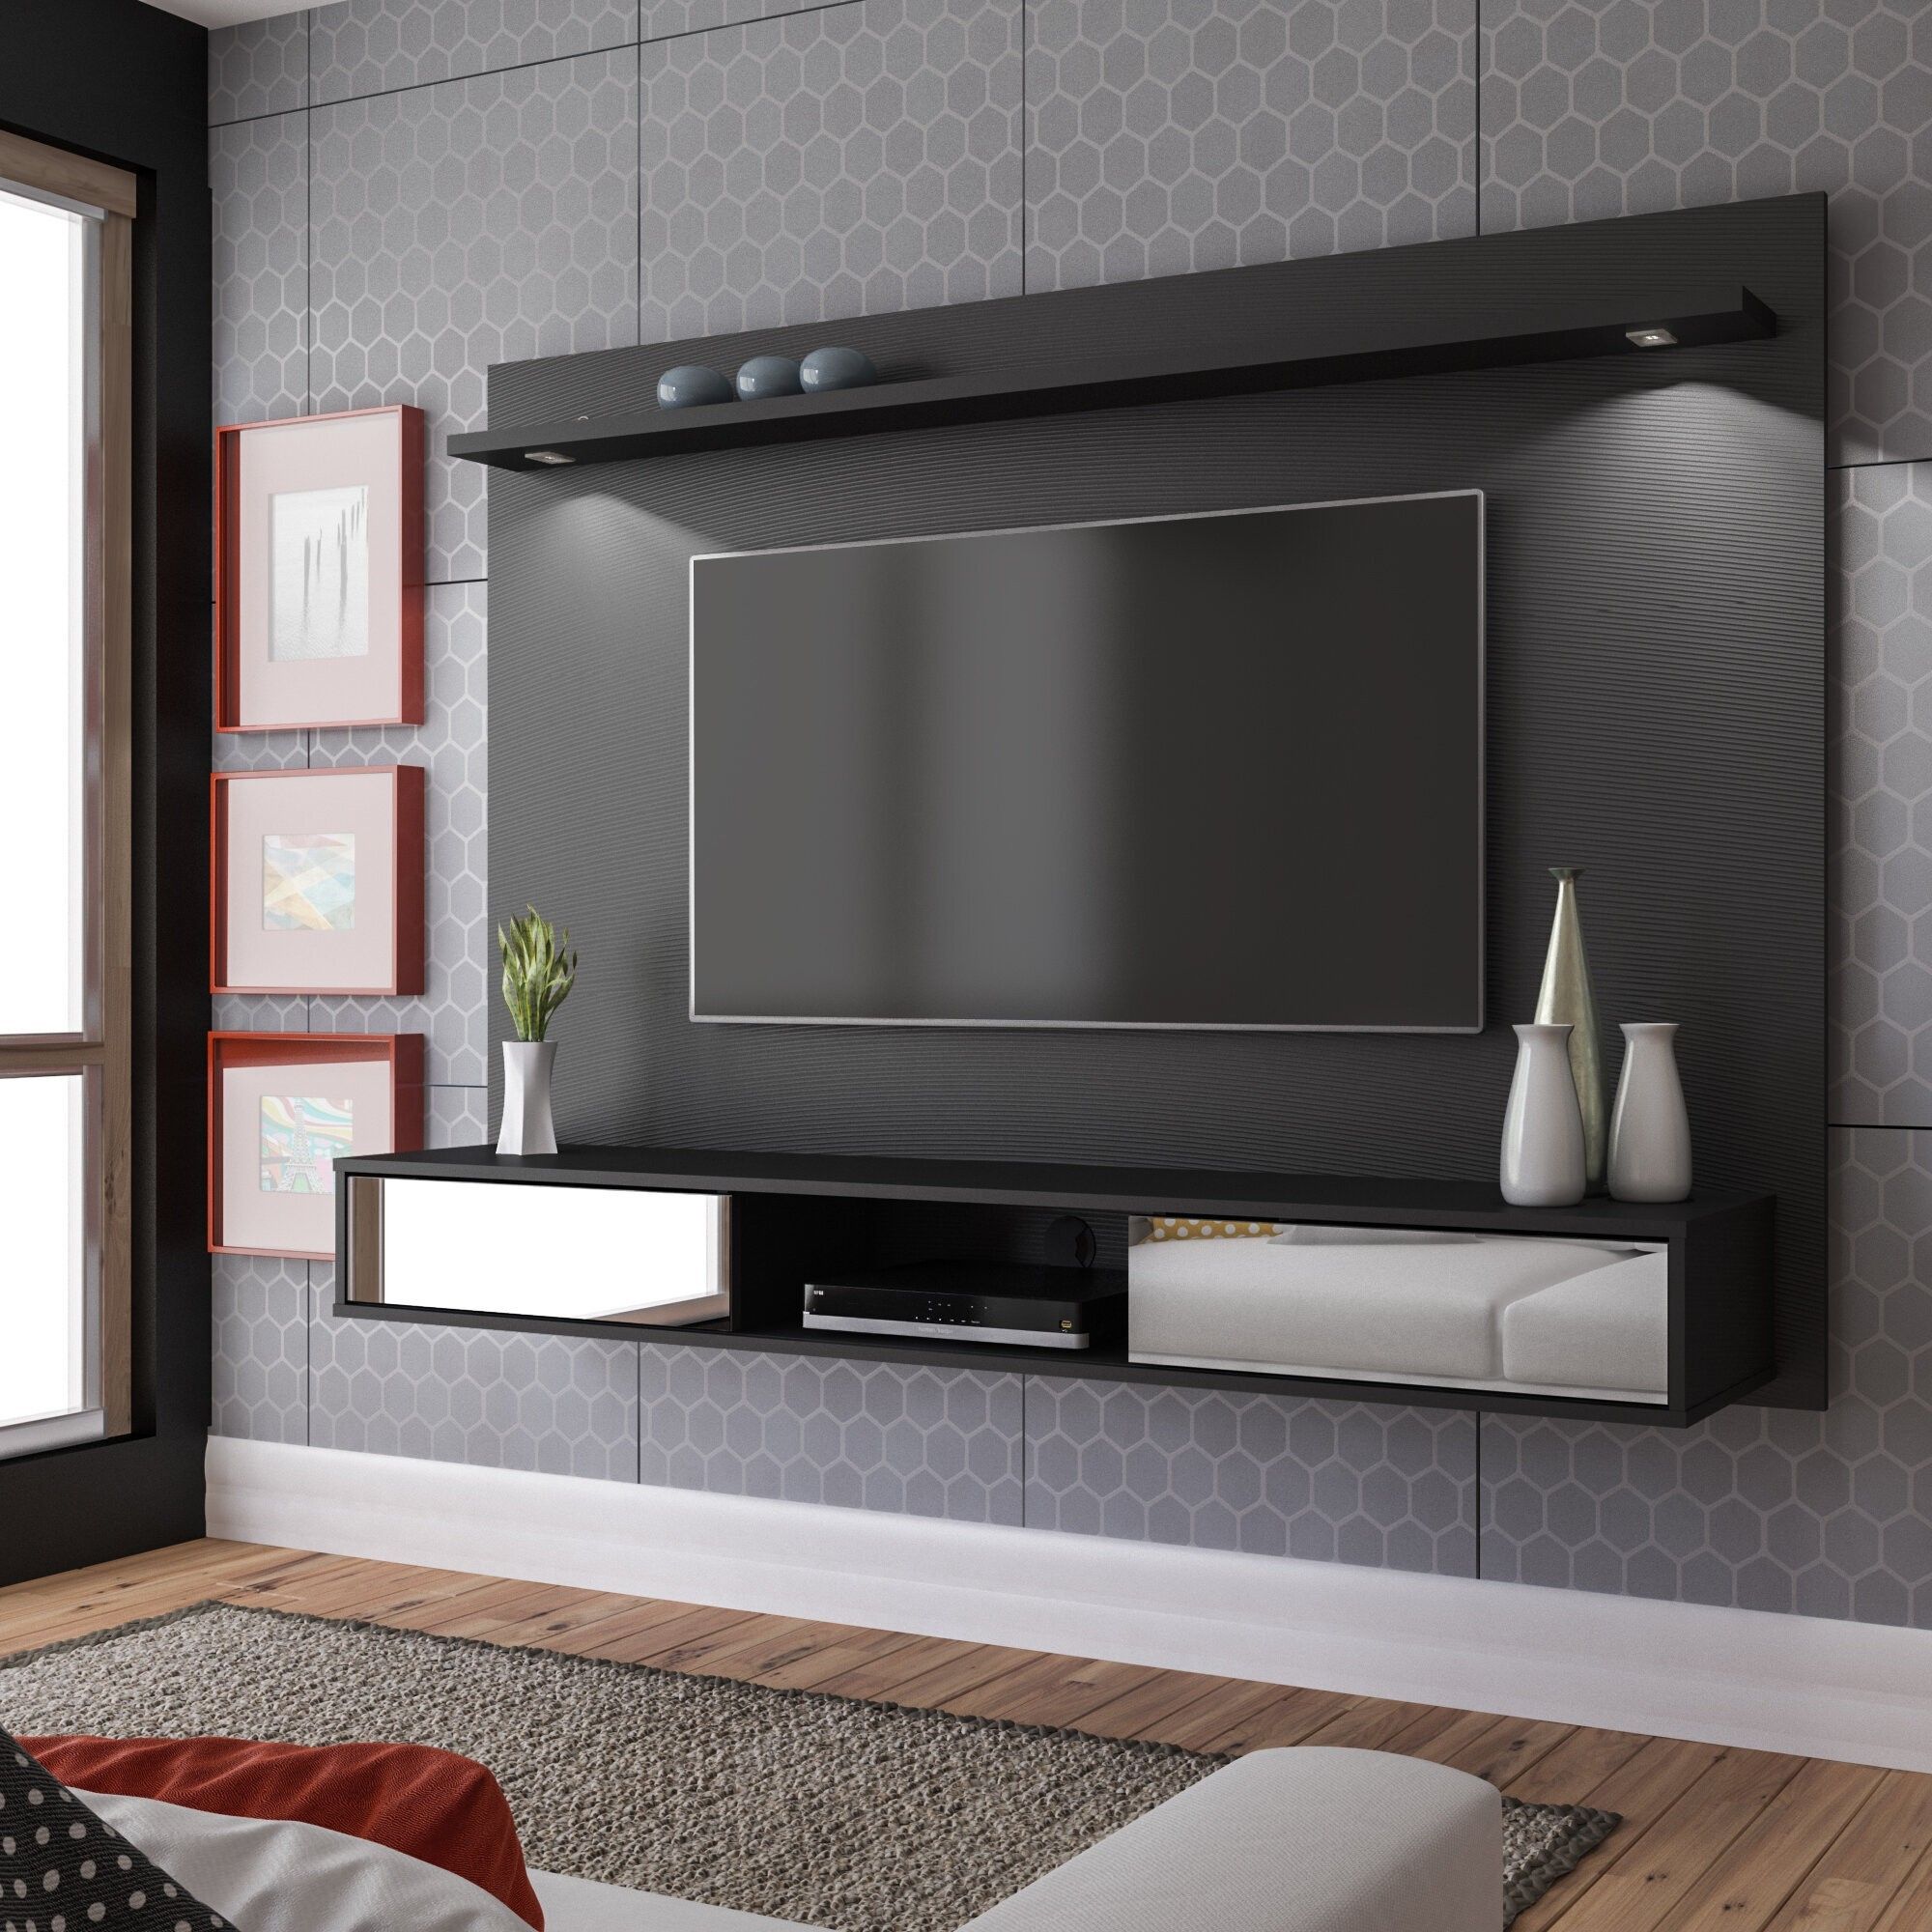 Give Your Family Room A Makeover With Minimally Designed Wooden Tv Throughout Floating Stands For Tvs (View 7 of 20)